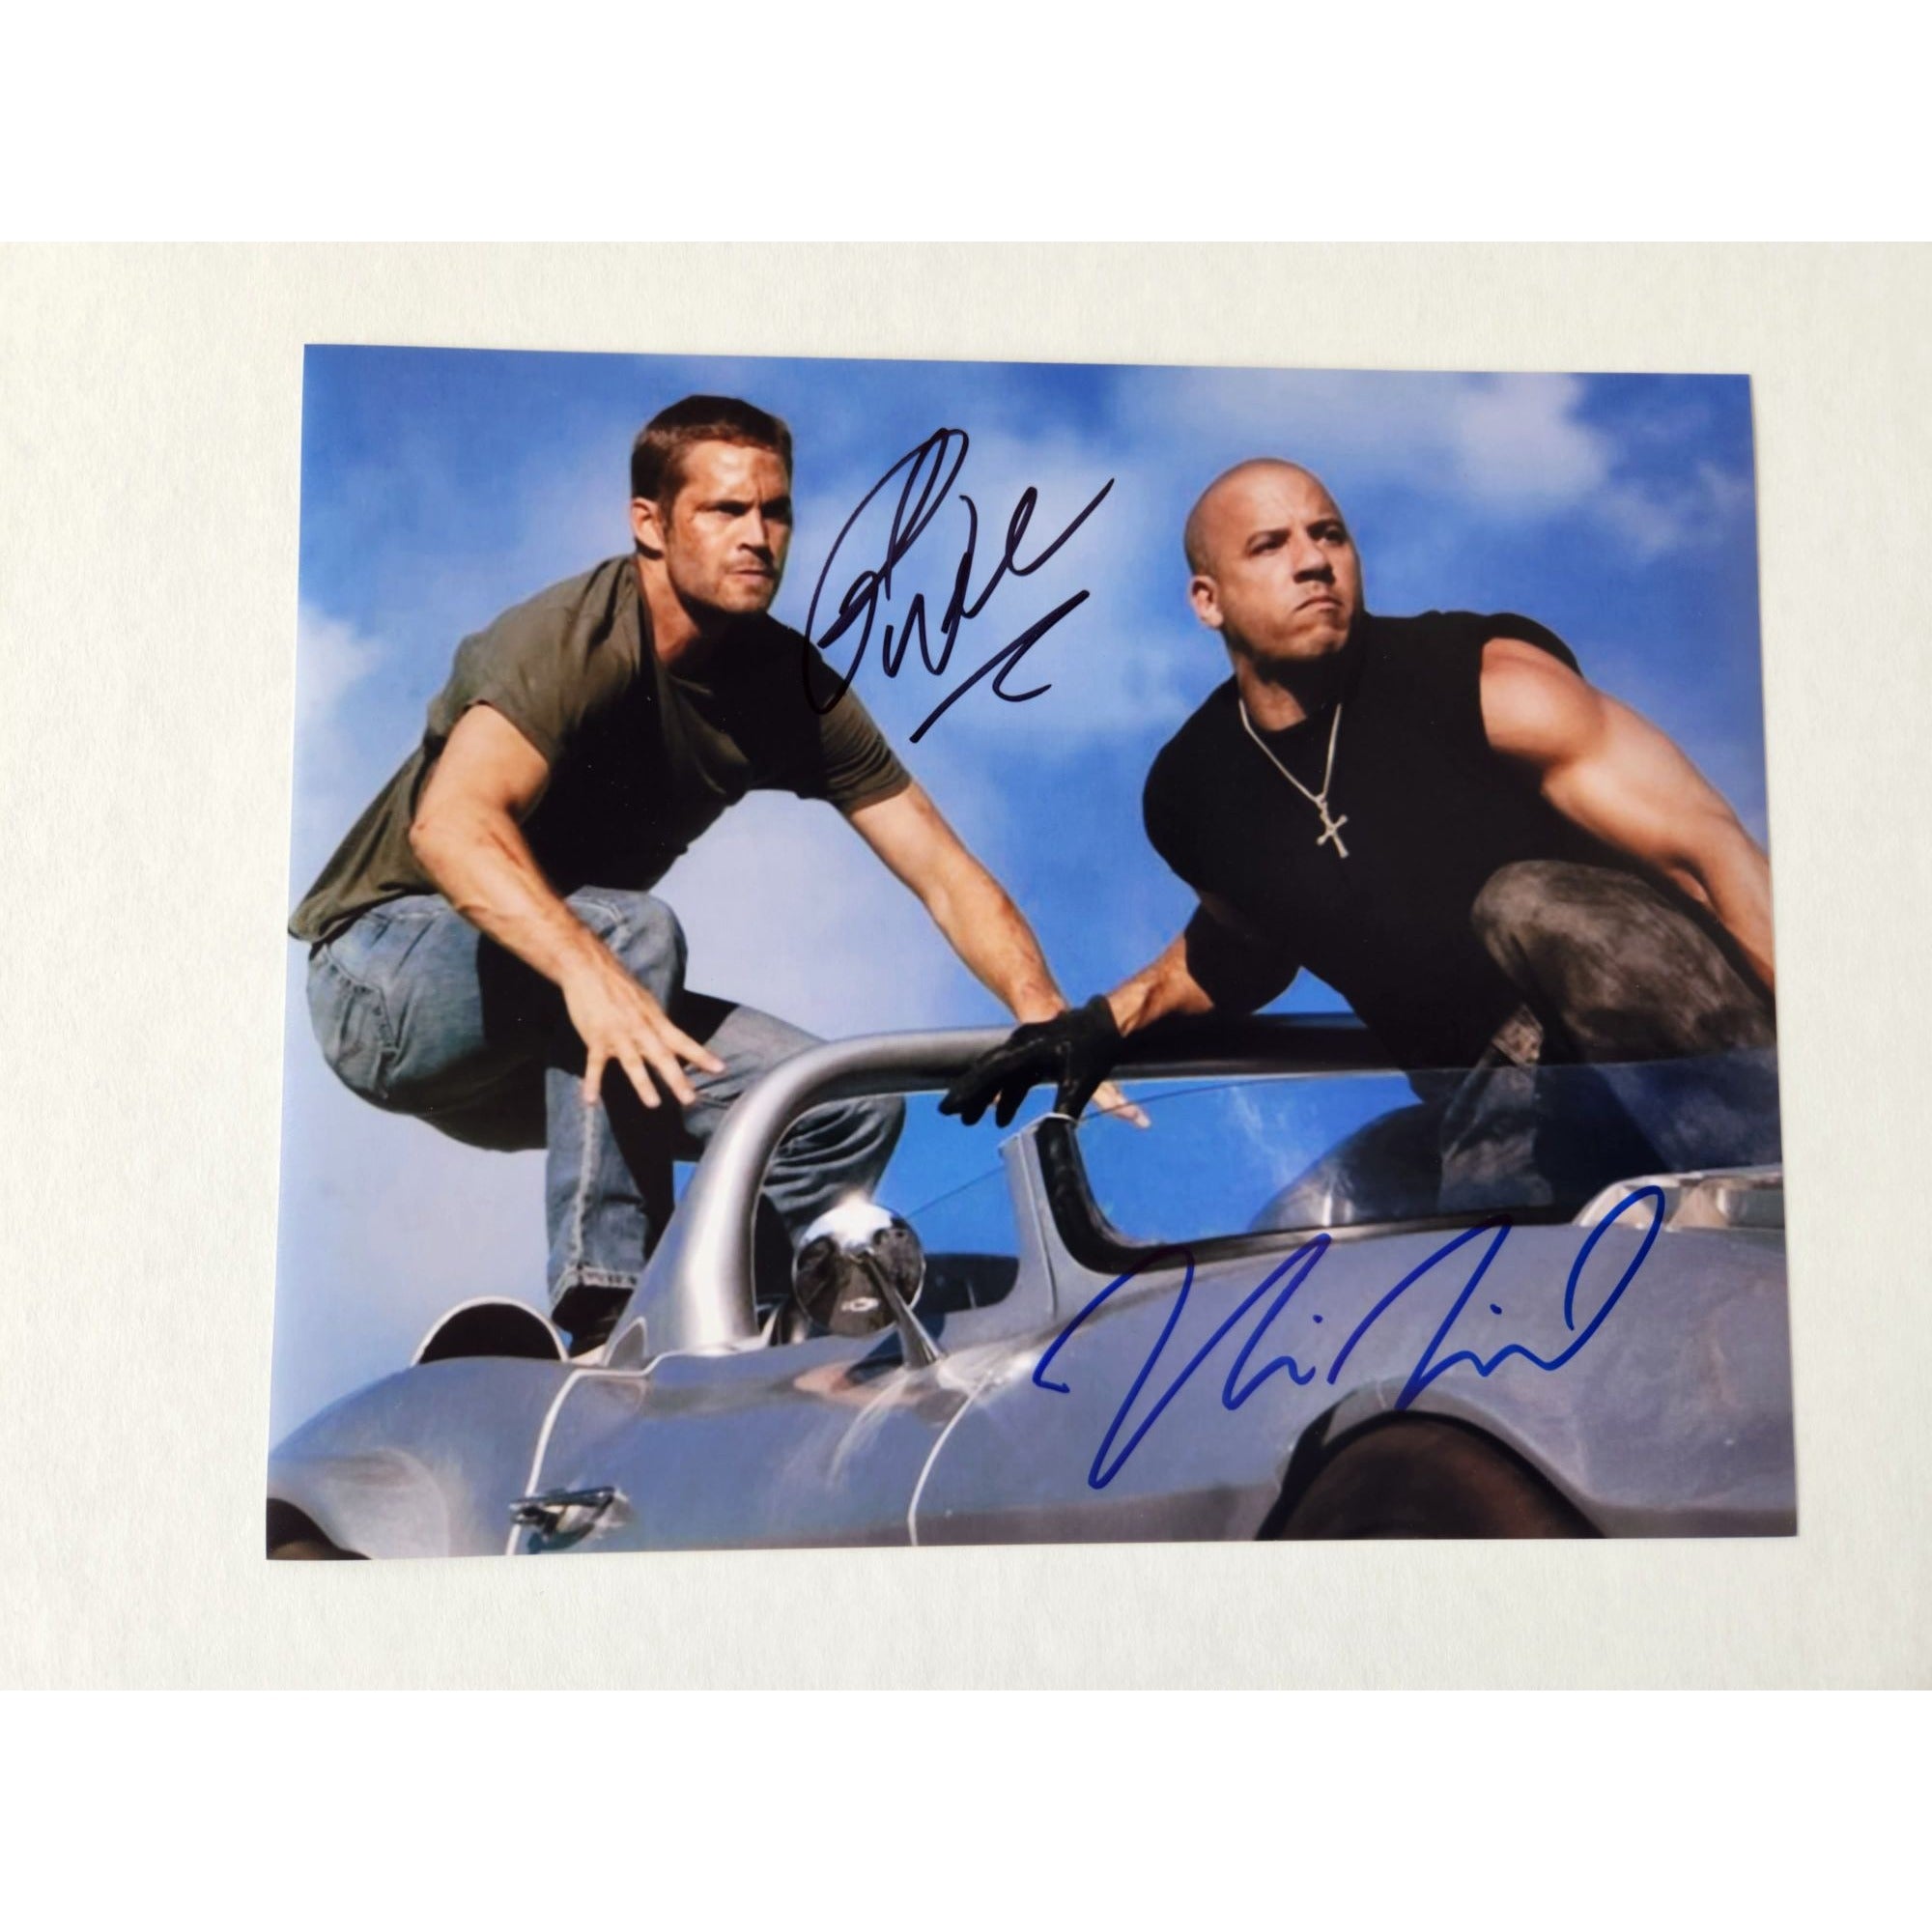 Vin Diesel Paul Walker Fast and Furious 8x10 photo signed with proof